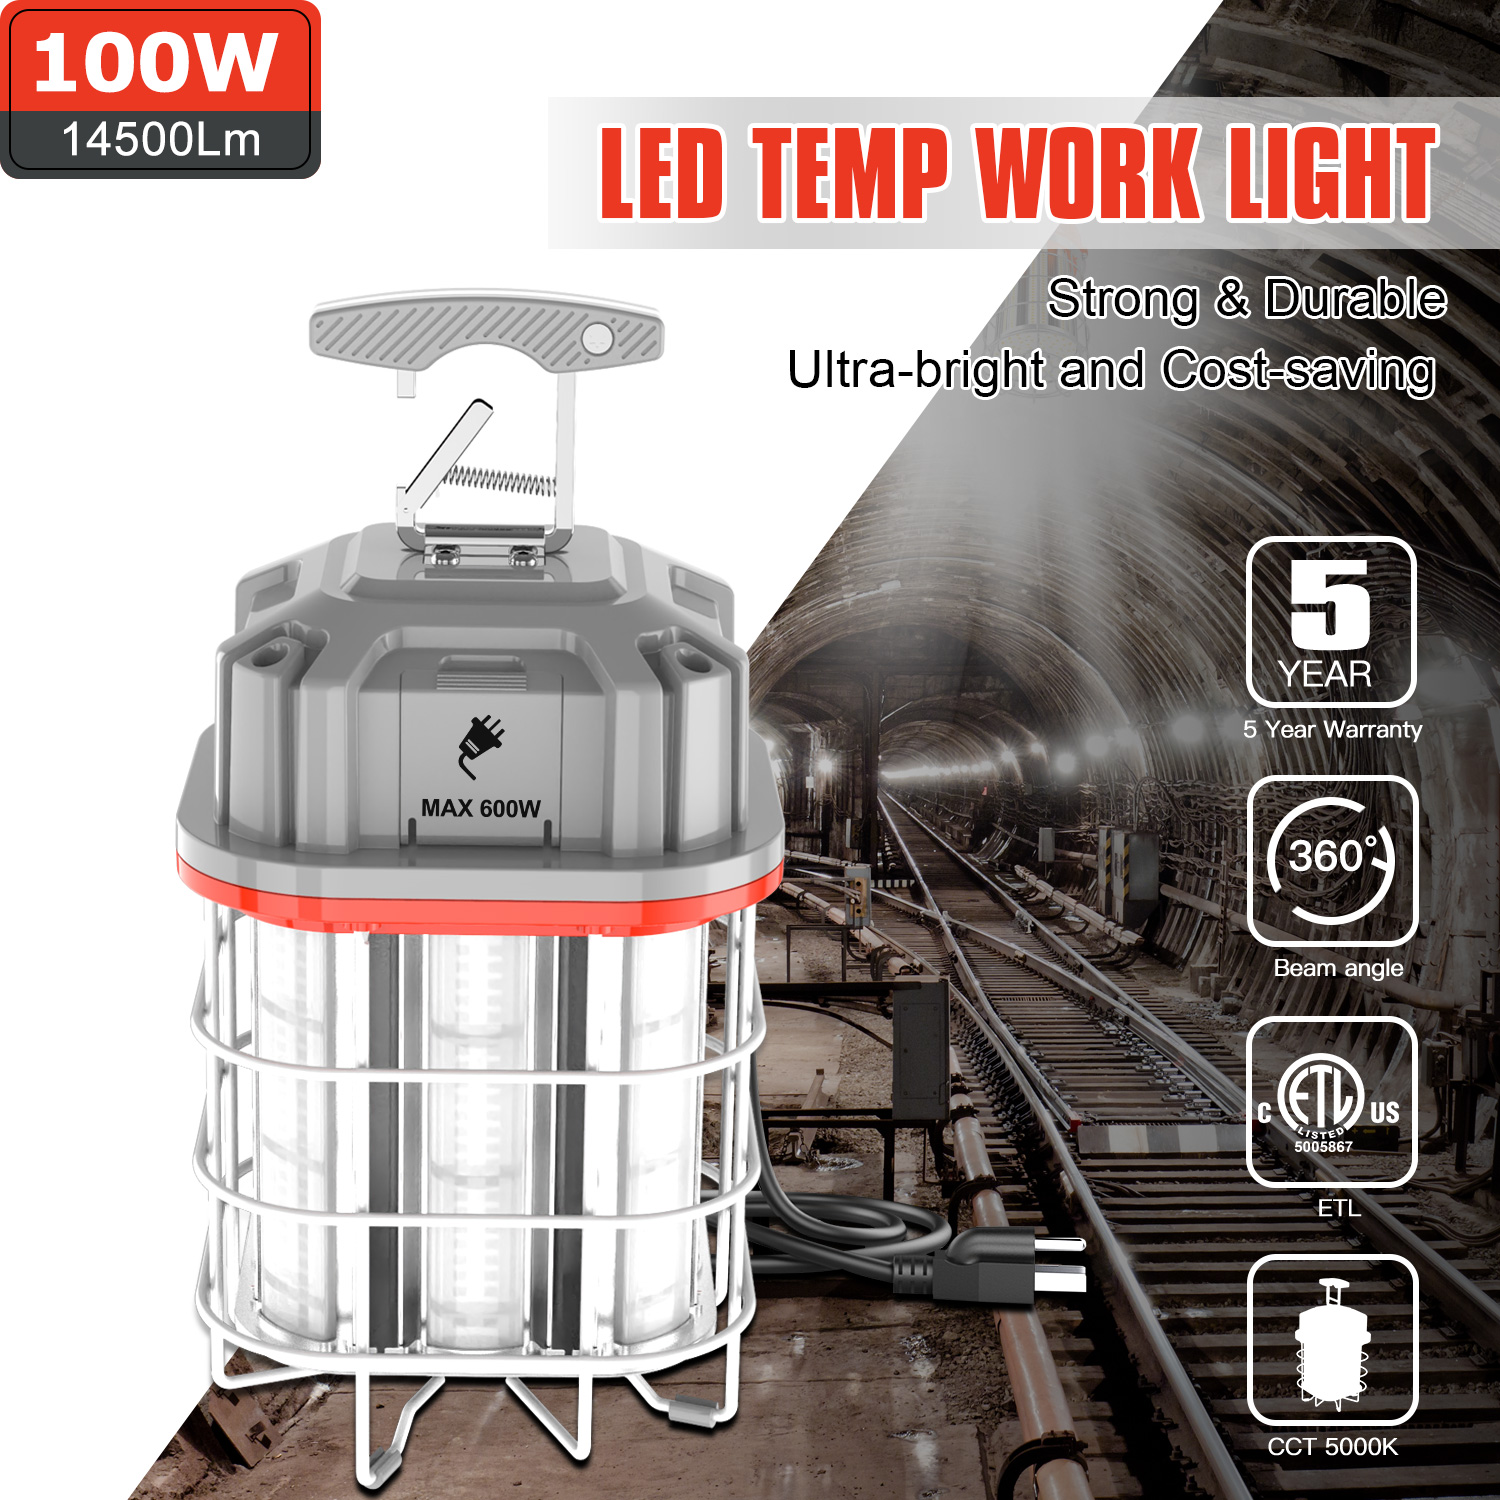 LED Temporary Work Light 100W 125W 150W Linkable LED portable Outdoor Lamp 110V 